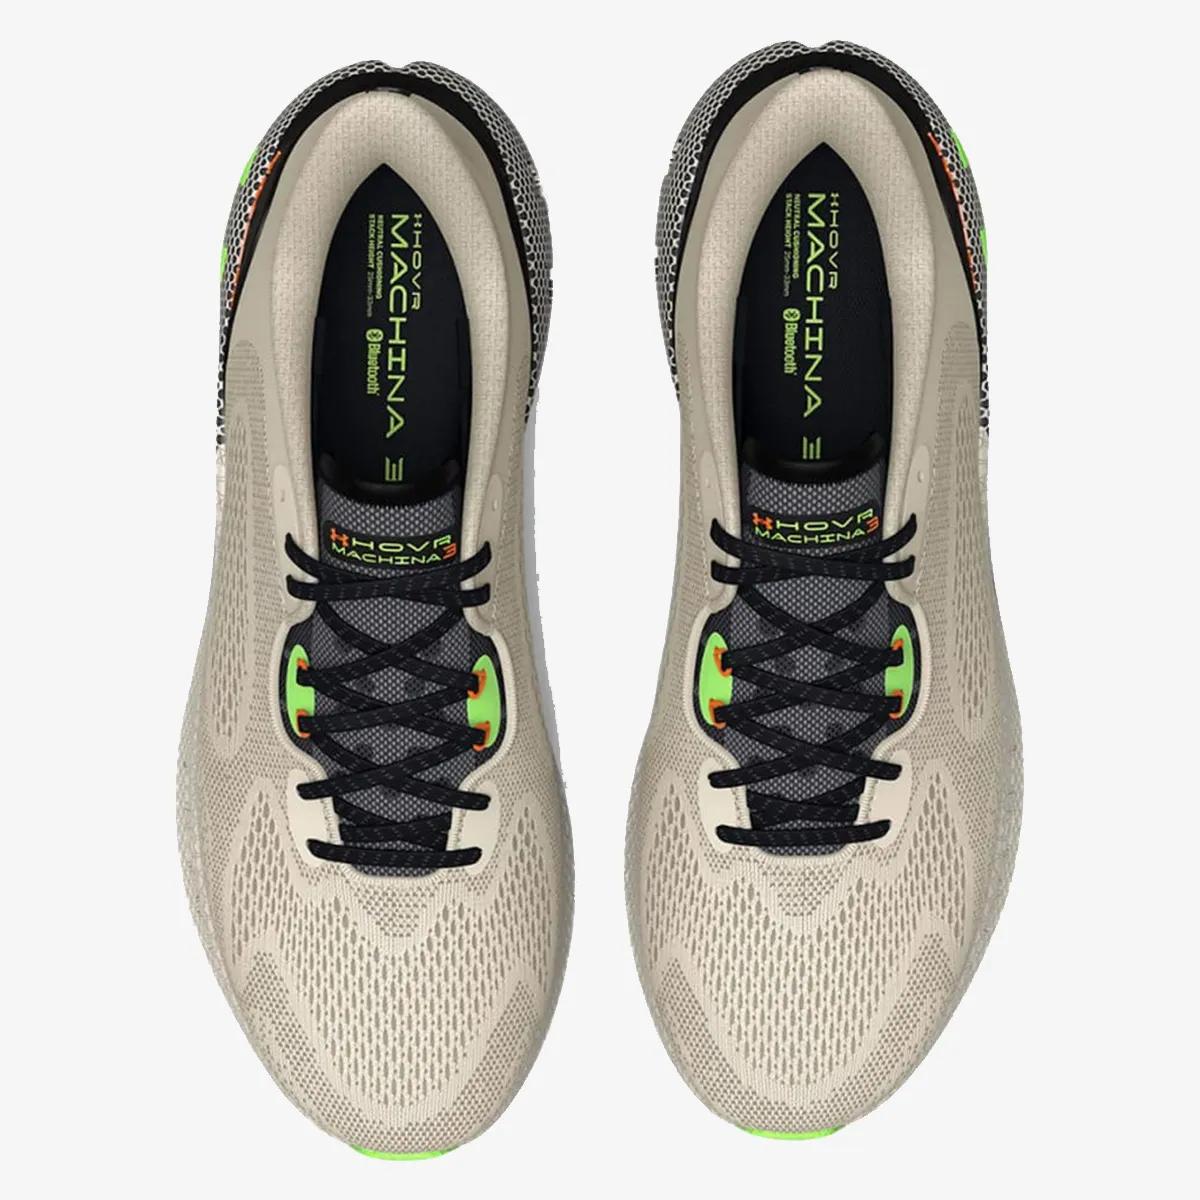 Under Armour HOVR™ Machina 3 Running Shoes 